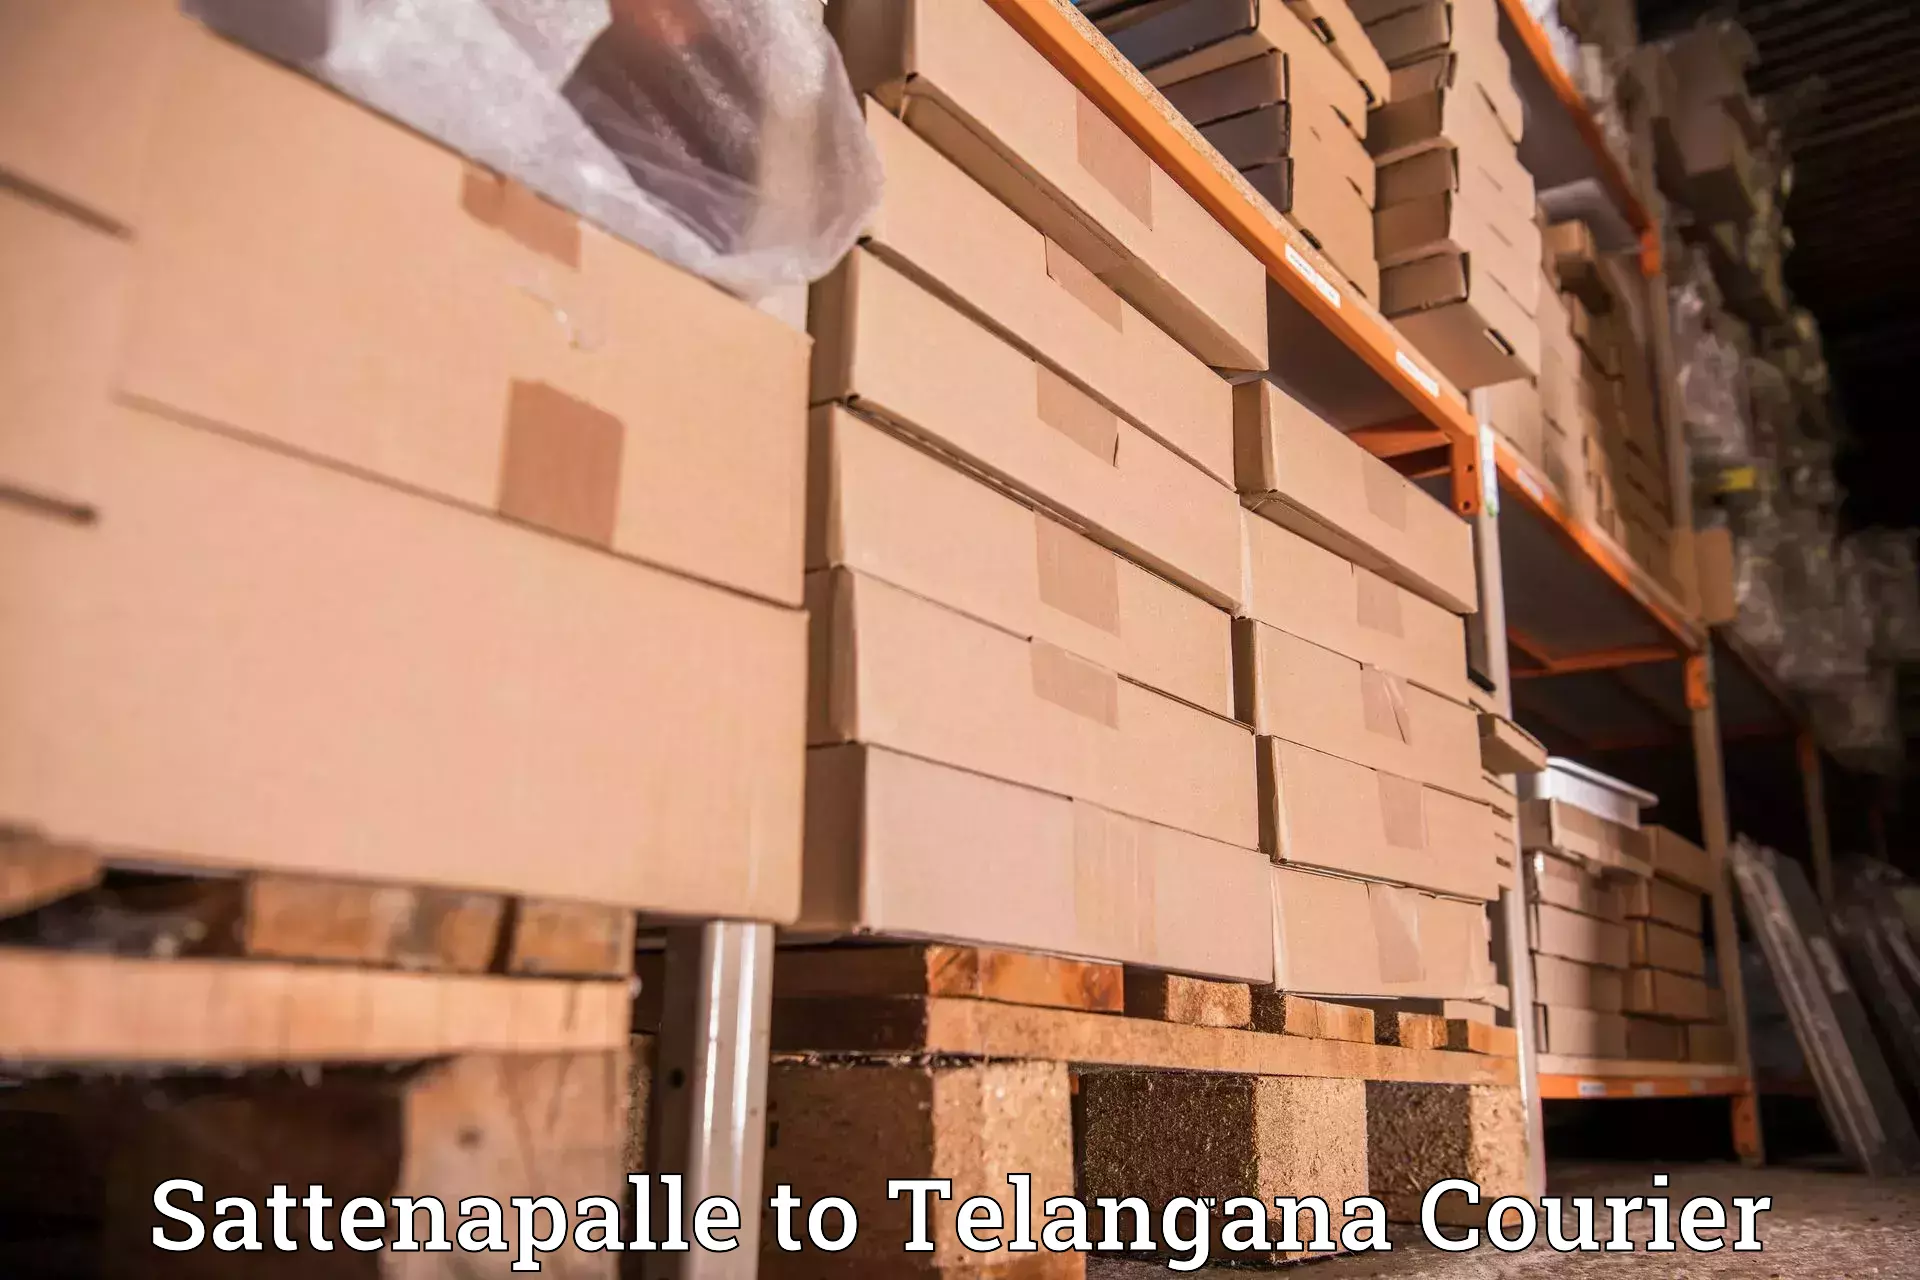 Next-day delivery options Sattenapalle to Telangana